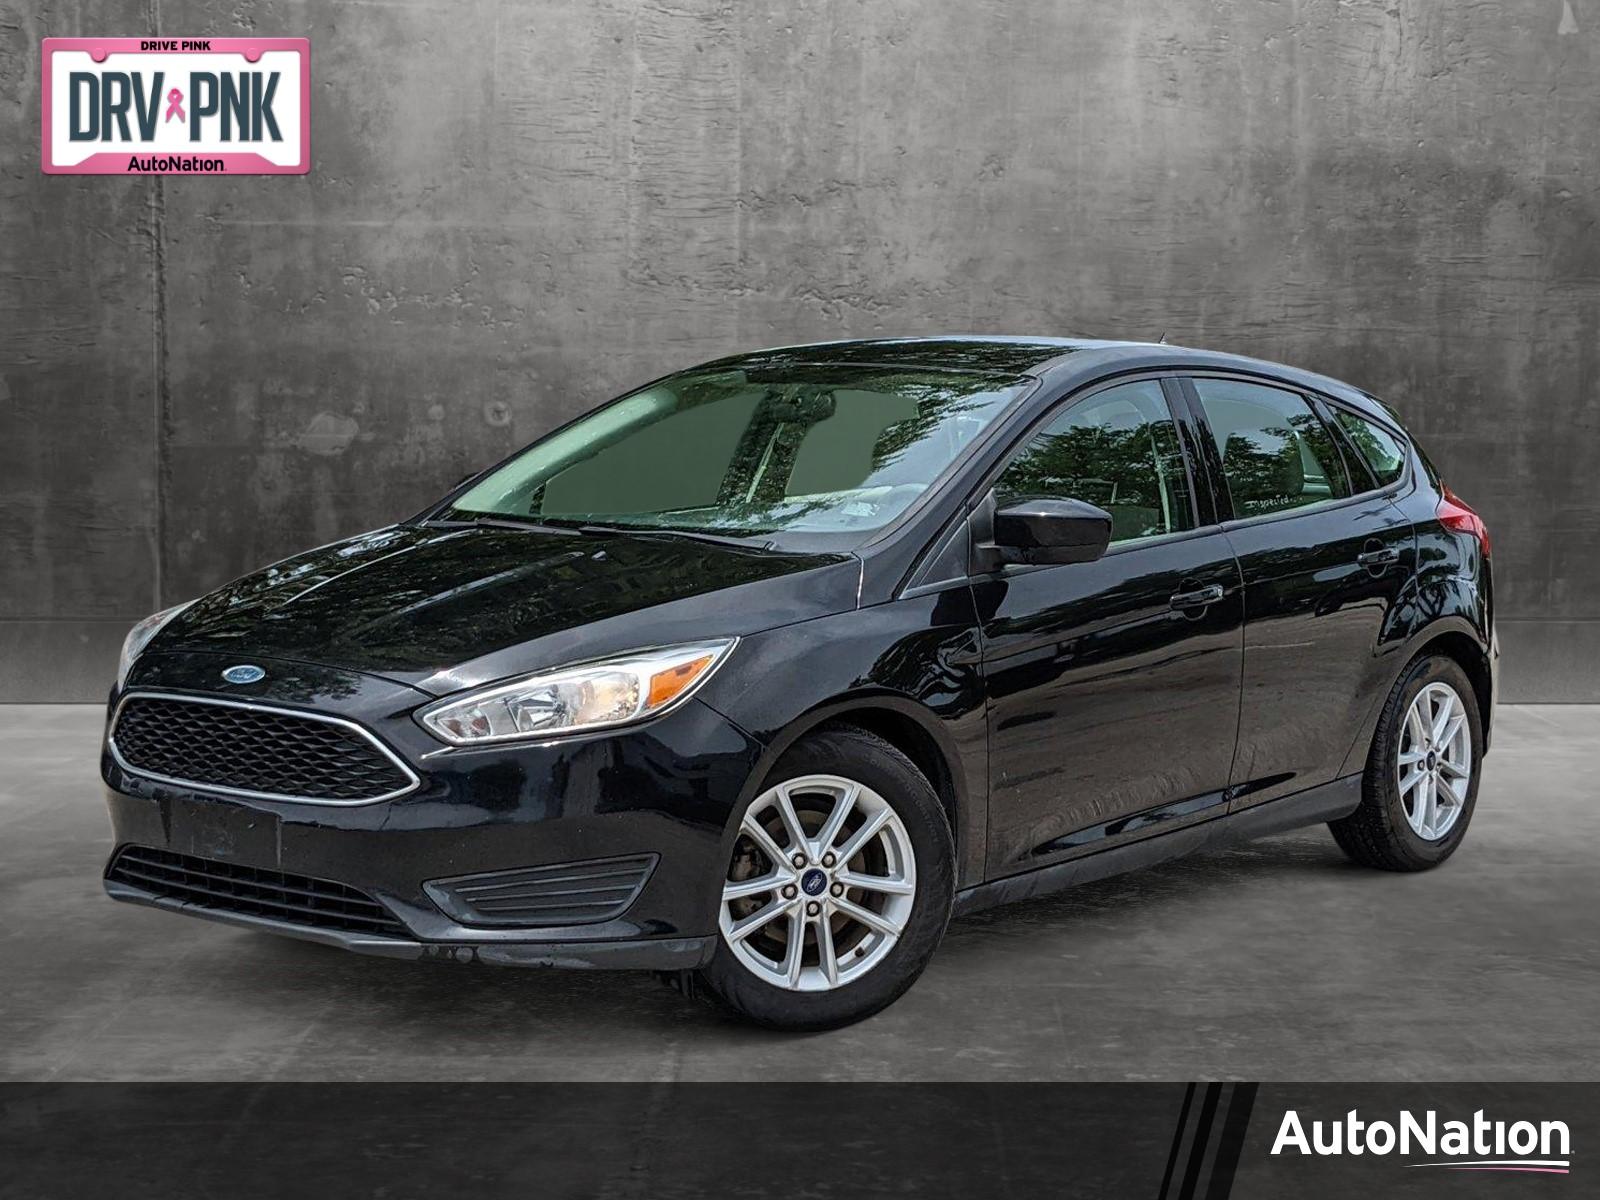 2018 Ford Focus Vehicle Photo in Jacksonville, FL 32256